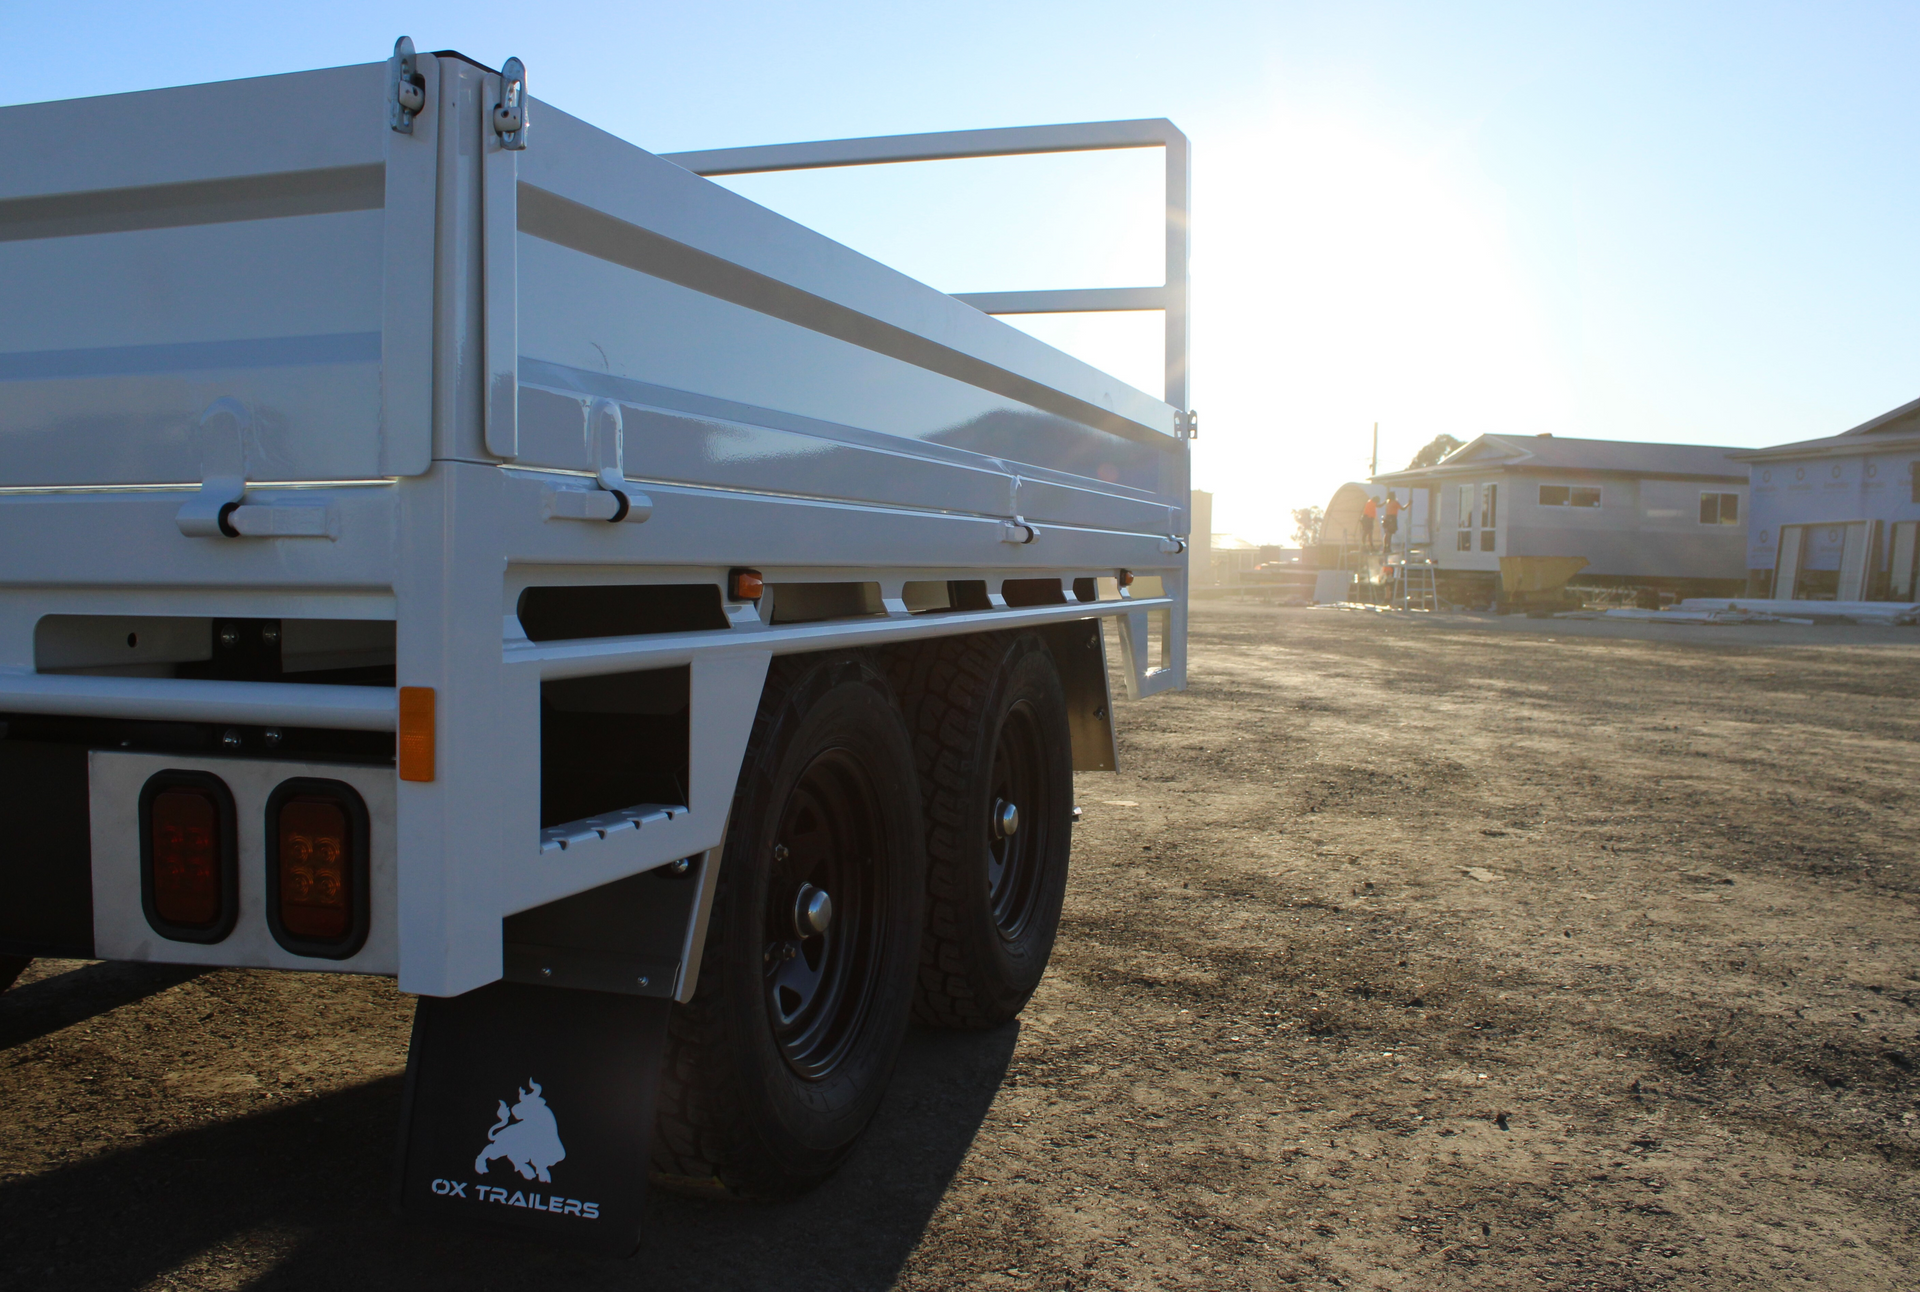 Image of an Ox Trailer with dropside extensions on a dirt road.